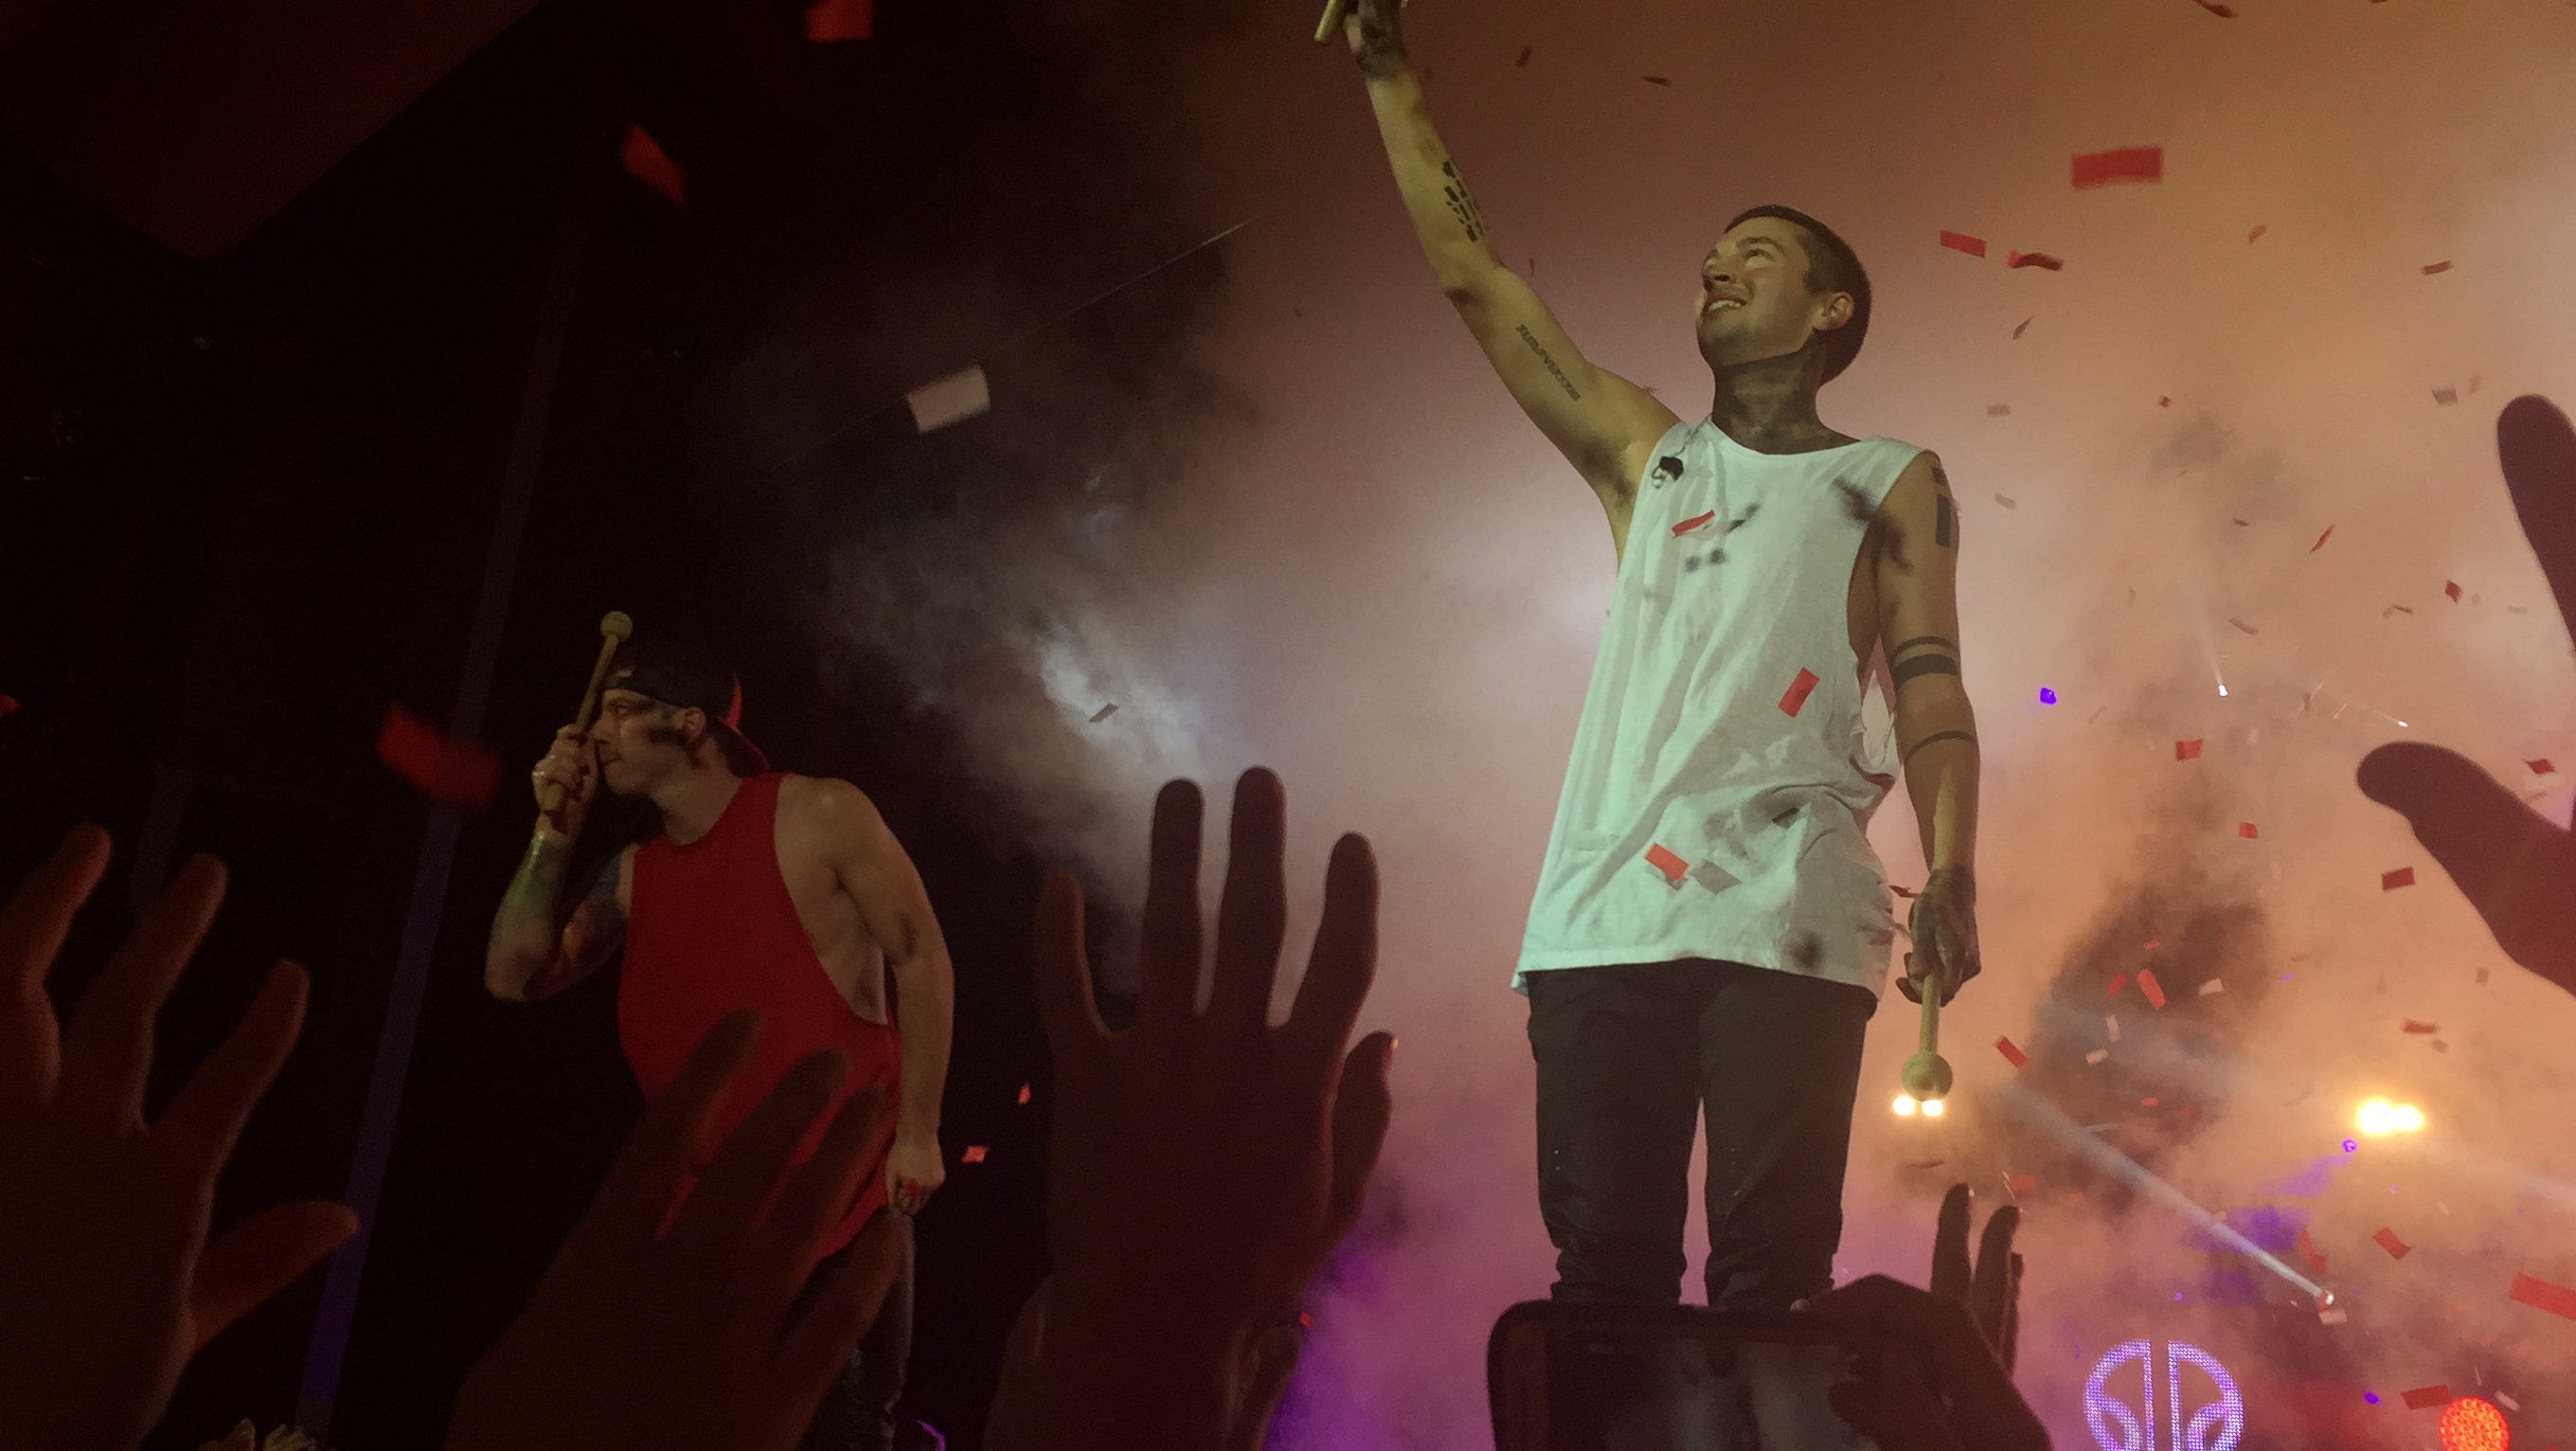 Twenty One Pilots playing drums on top of the crowd!